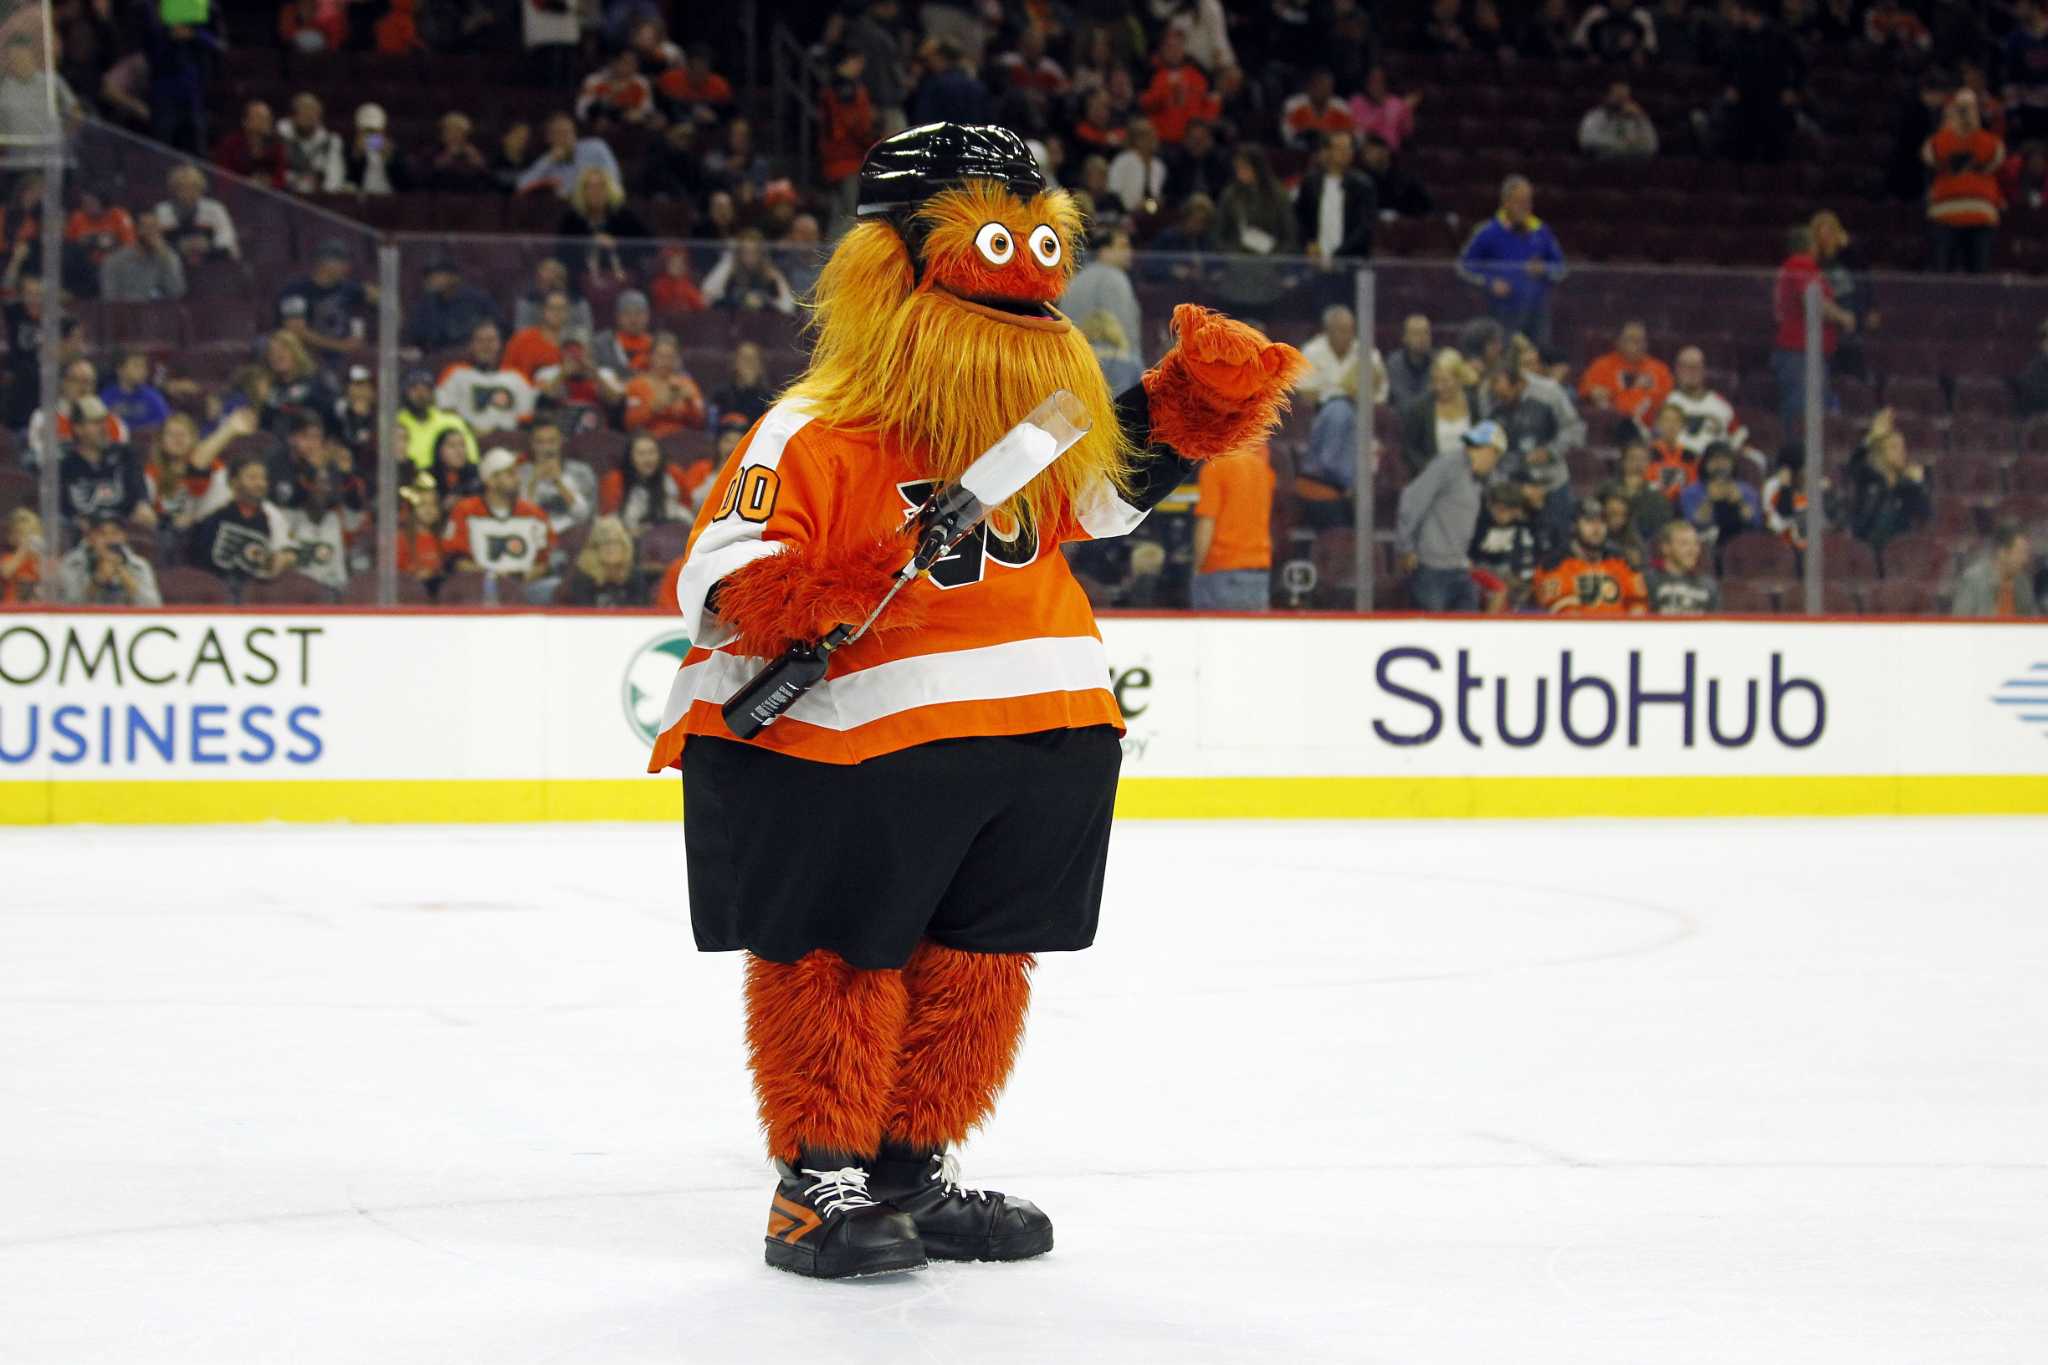 Odd-looking hockey mascot triggers flood of comments